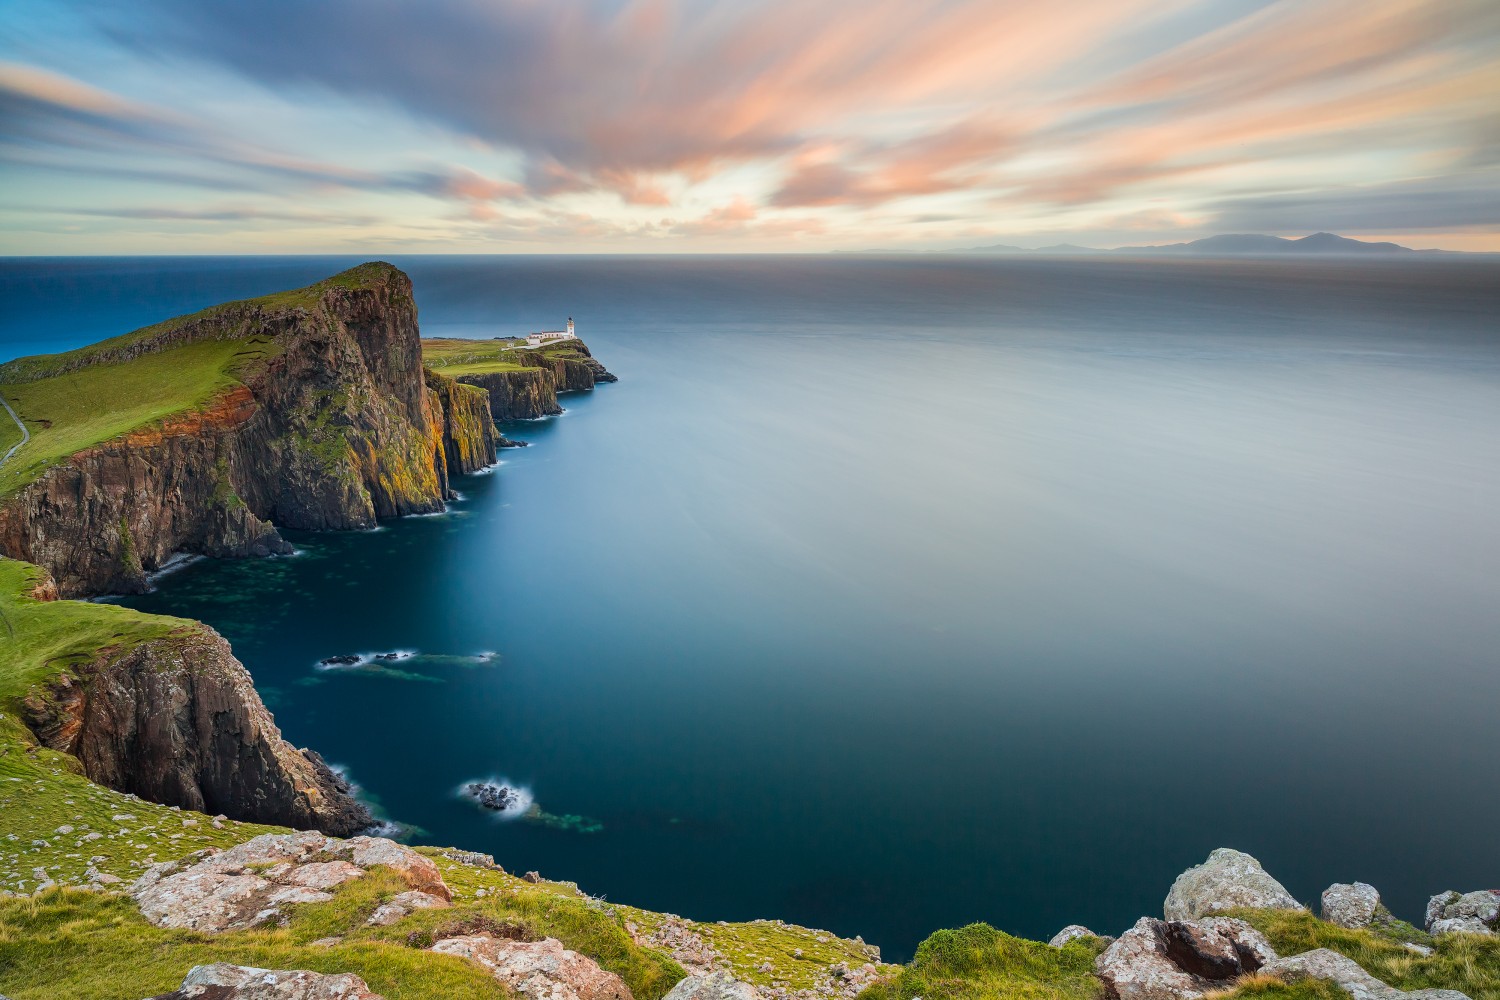 Shoot Stunning Seascapes With These Long Exposure Tips